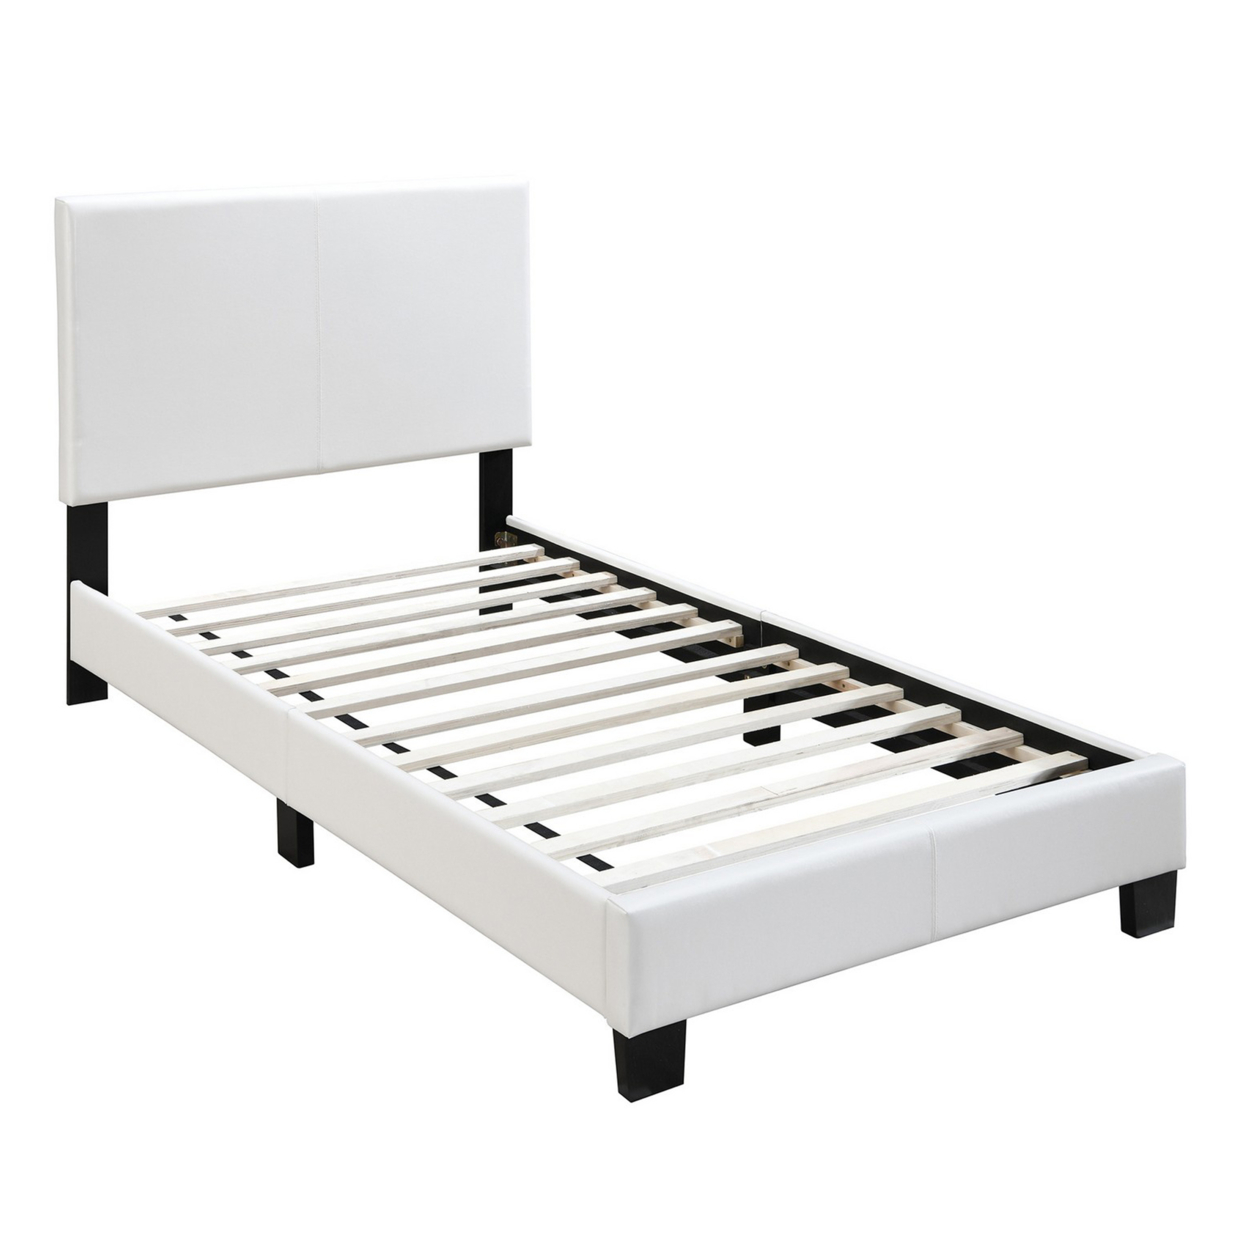 Transitional Style Leatherette Twin Bed With Padded Headboard, White- Saltoro Sherpi